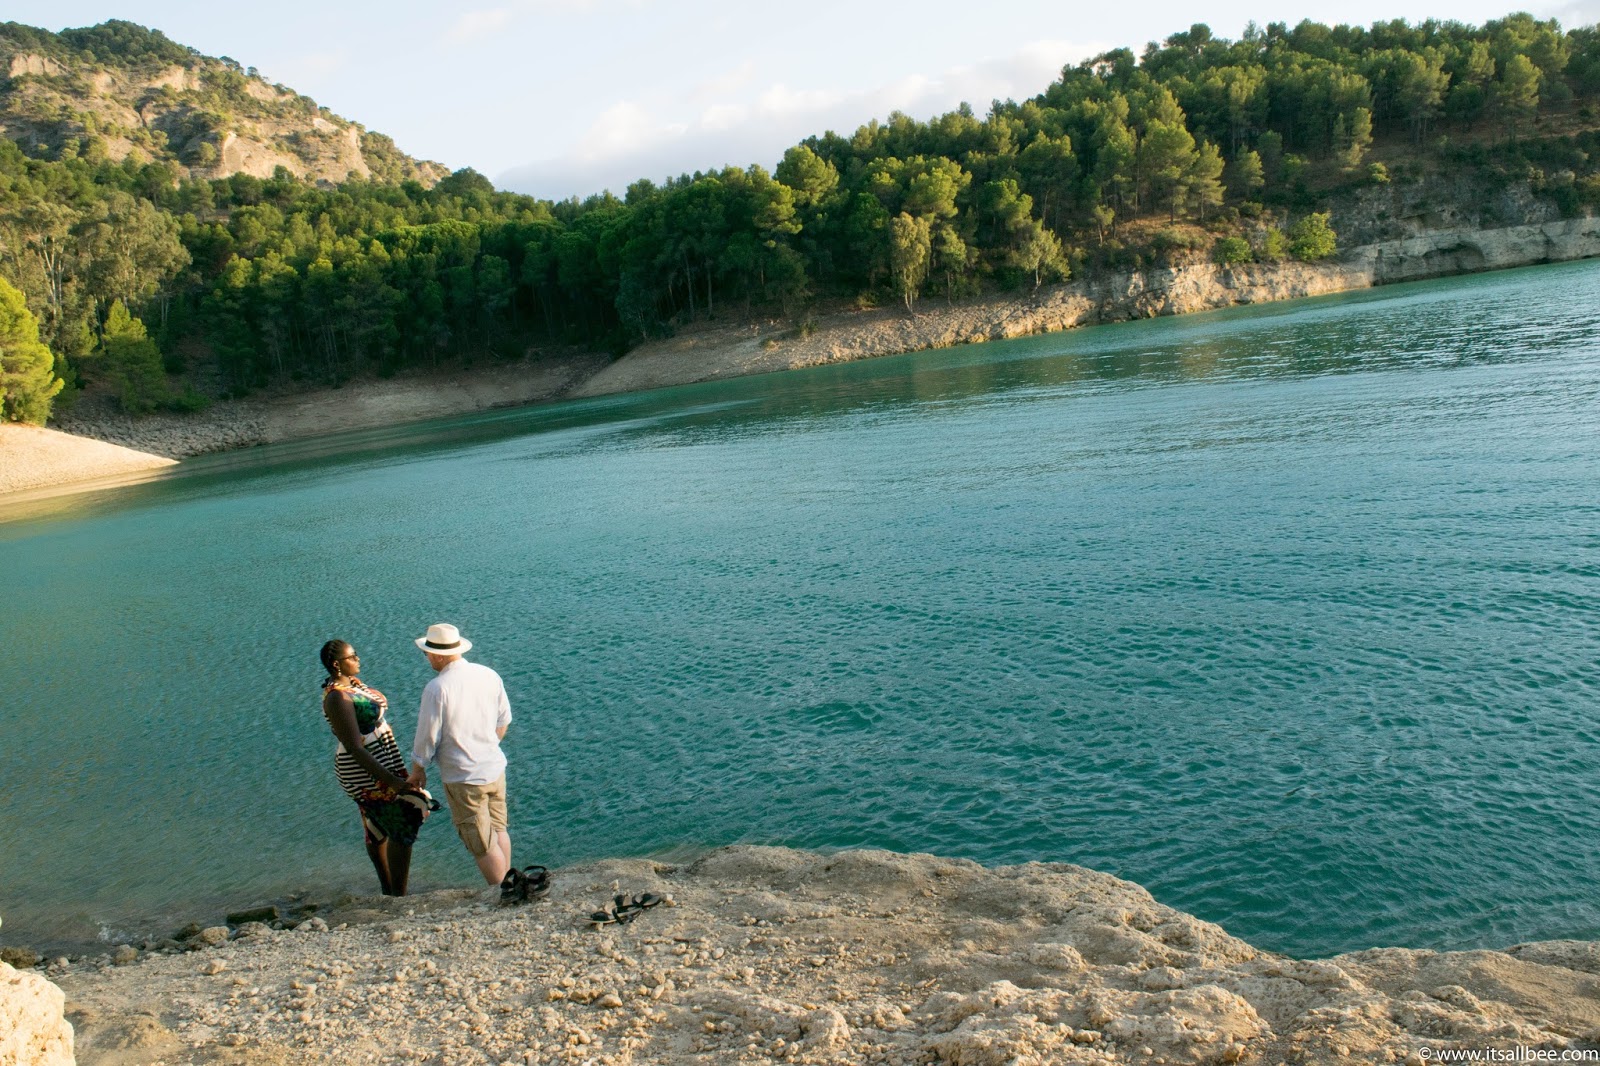 El Chorro Malaga | The Best Spot To Watch The Sunset In Andalucia